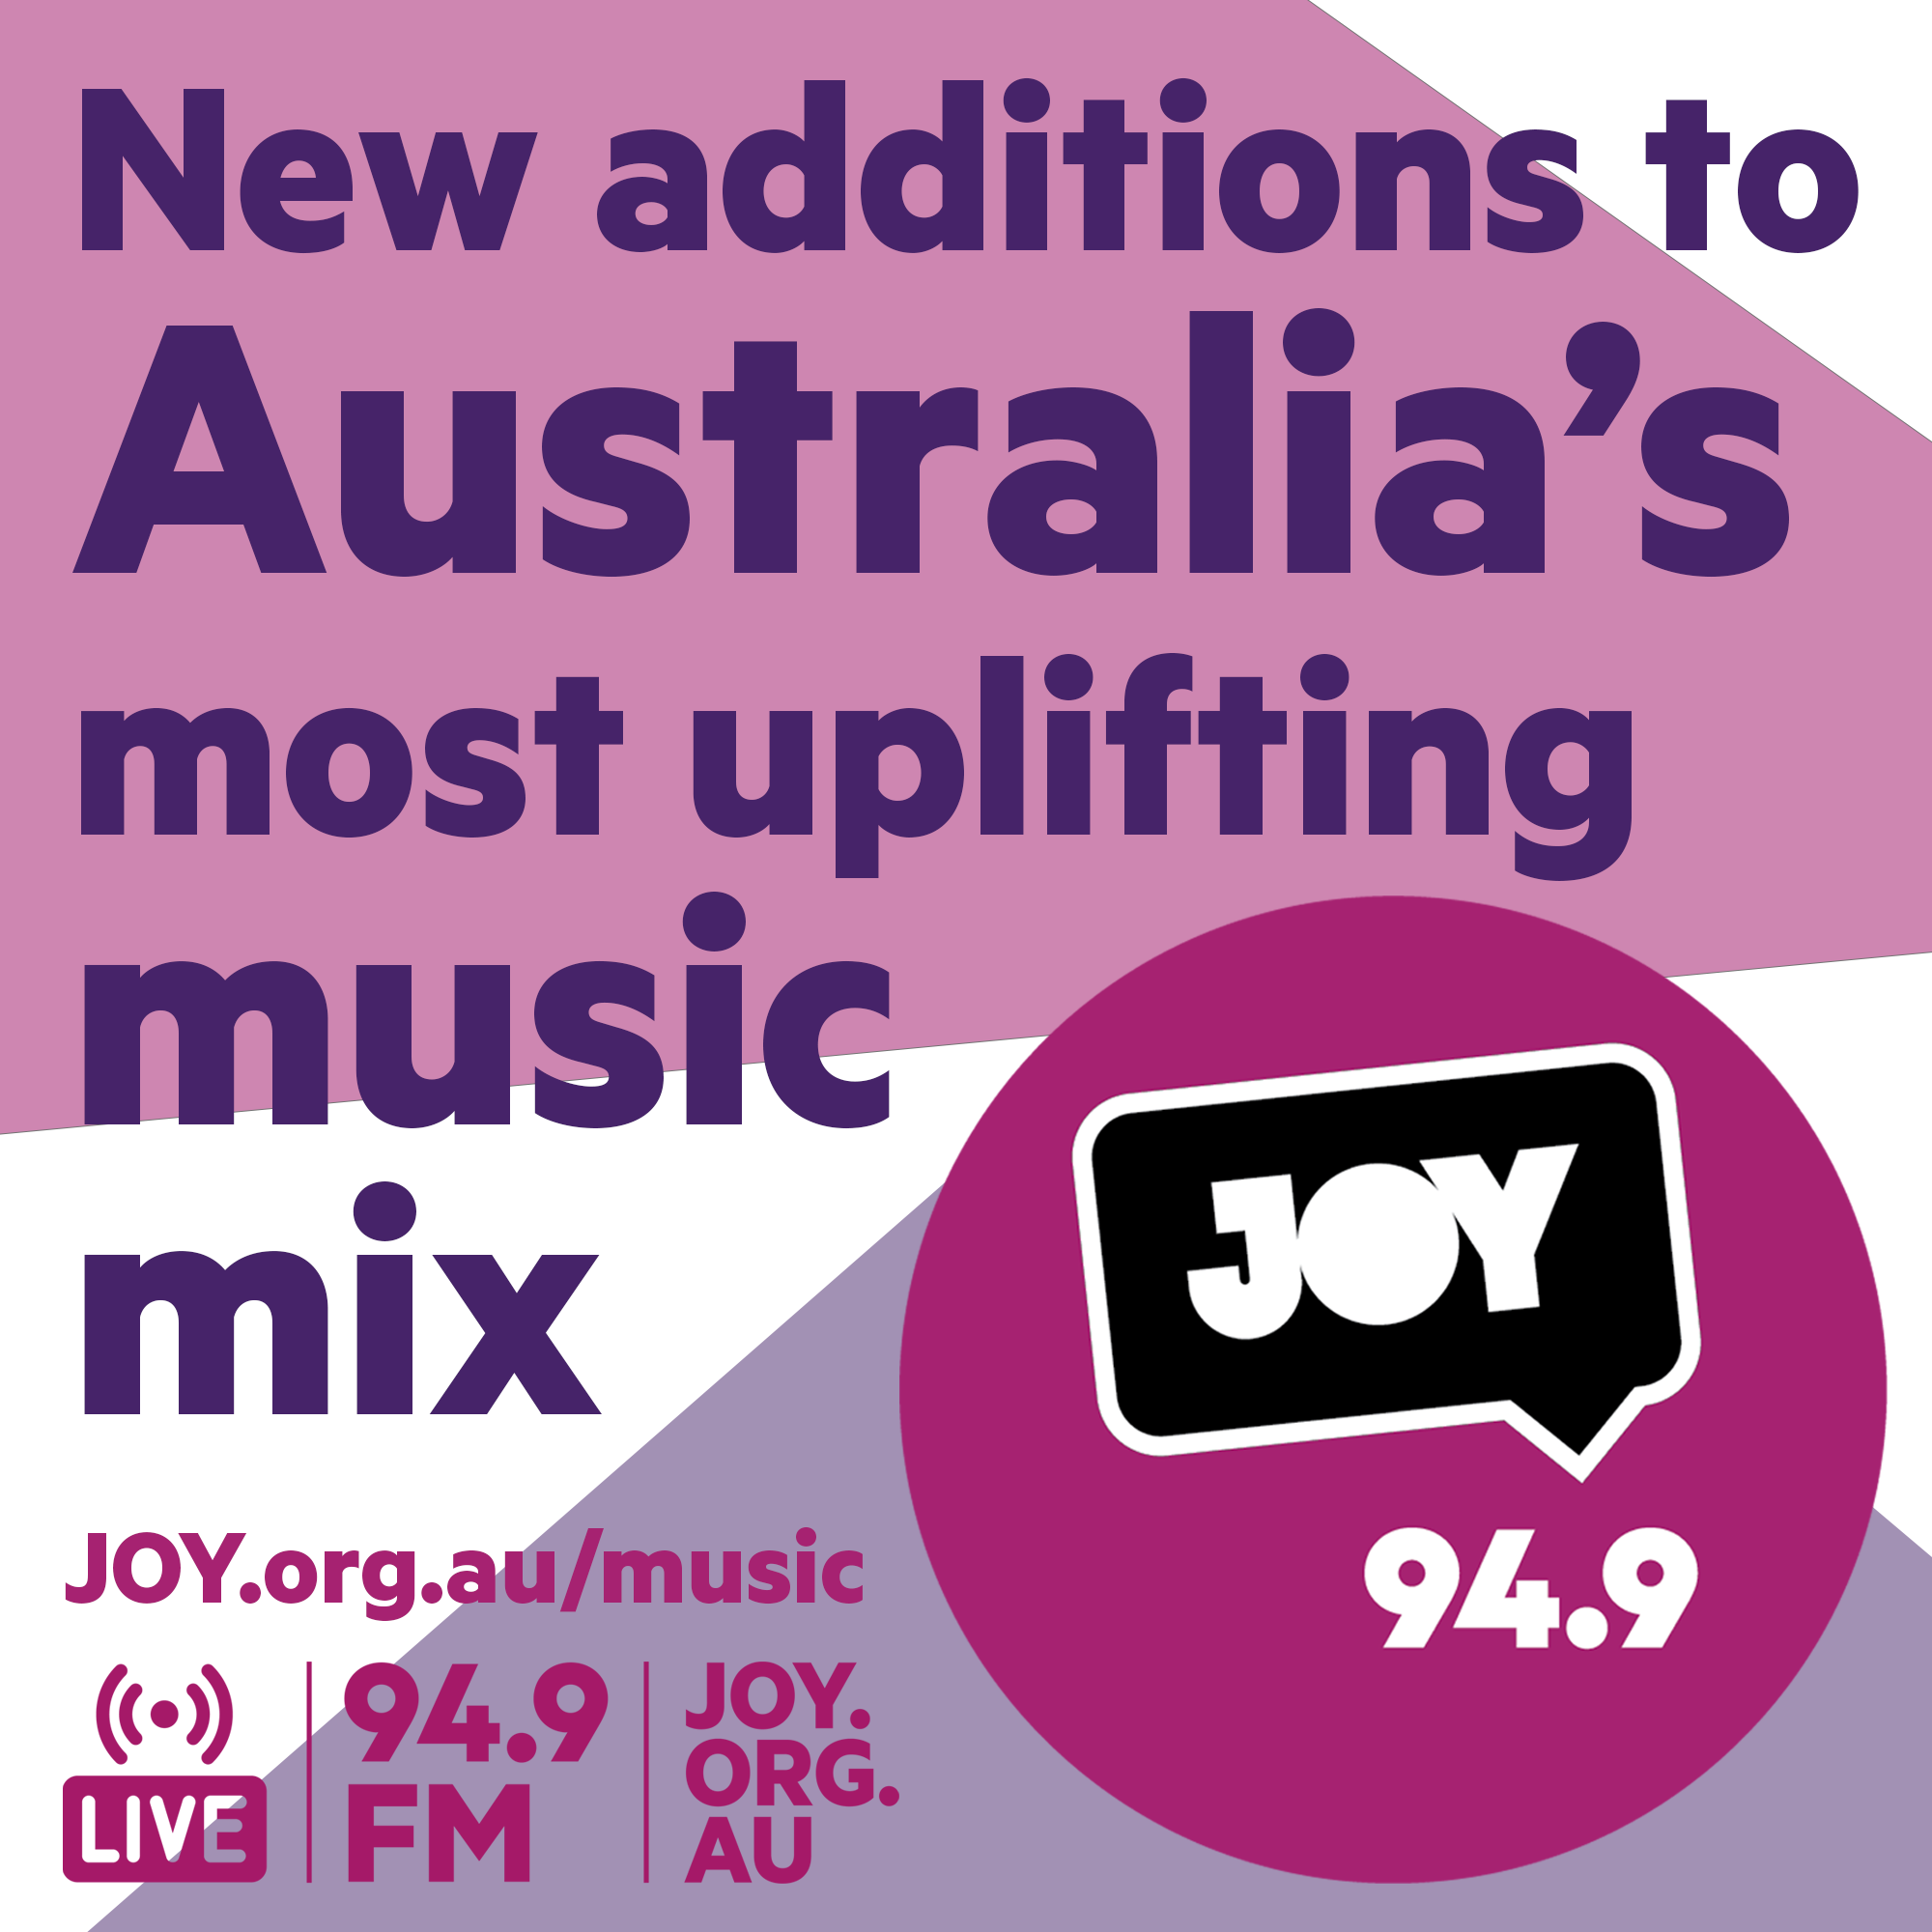 The newest songs to Australia’s most uplifting music mix: 2 March 2022